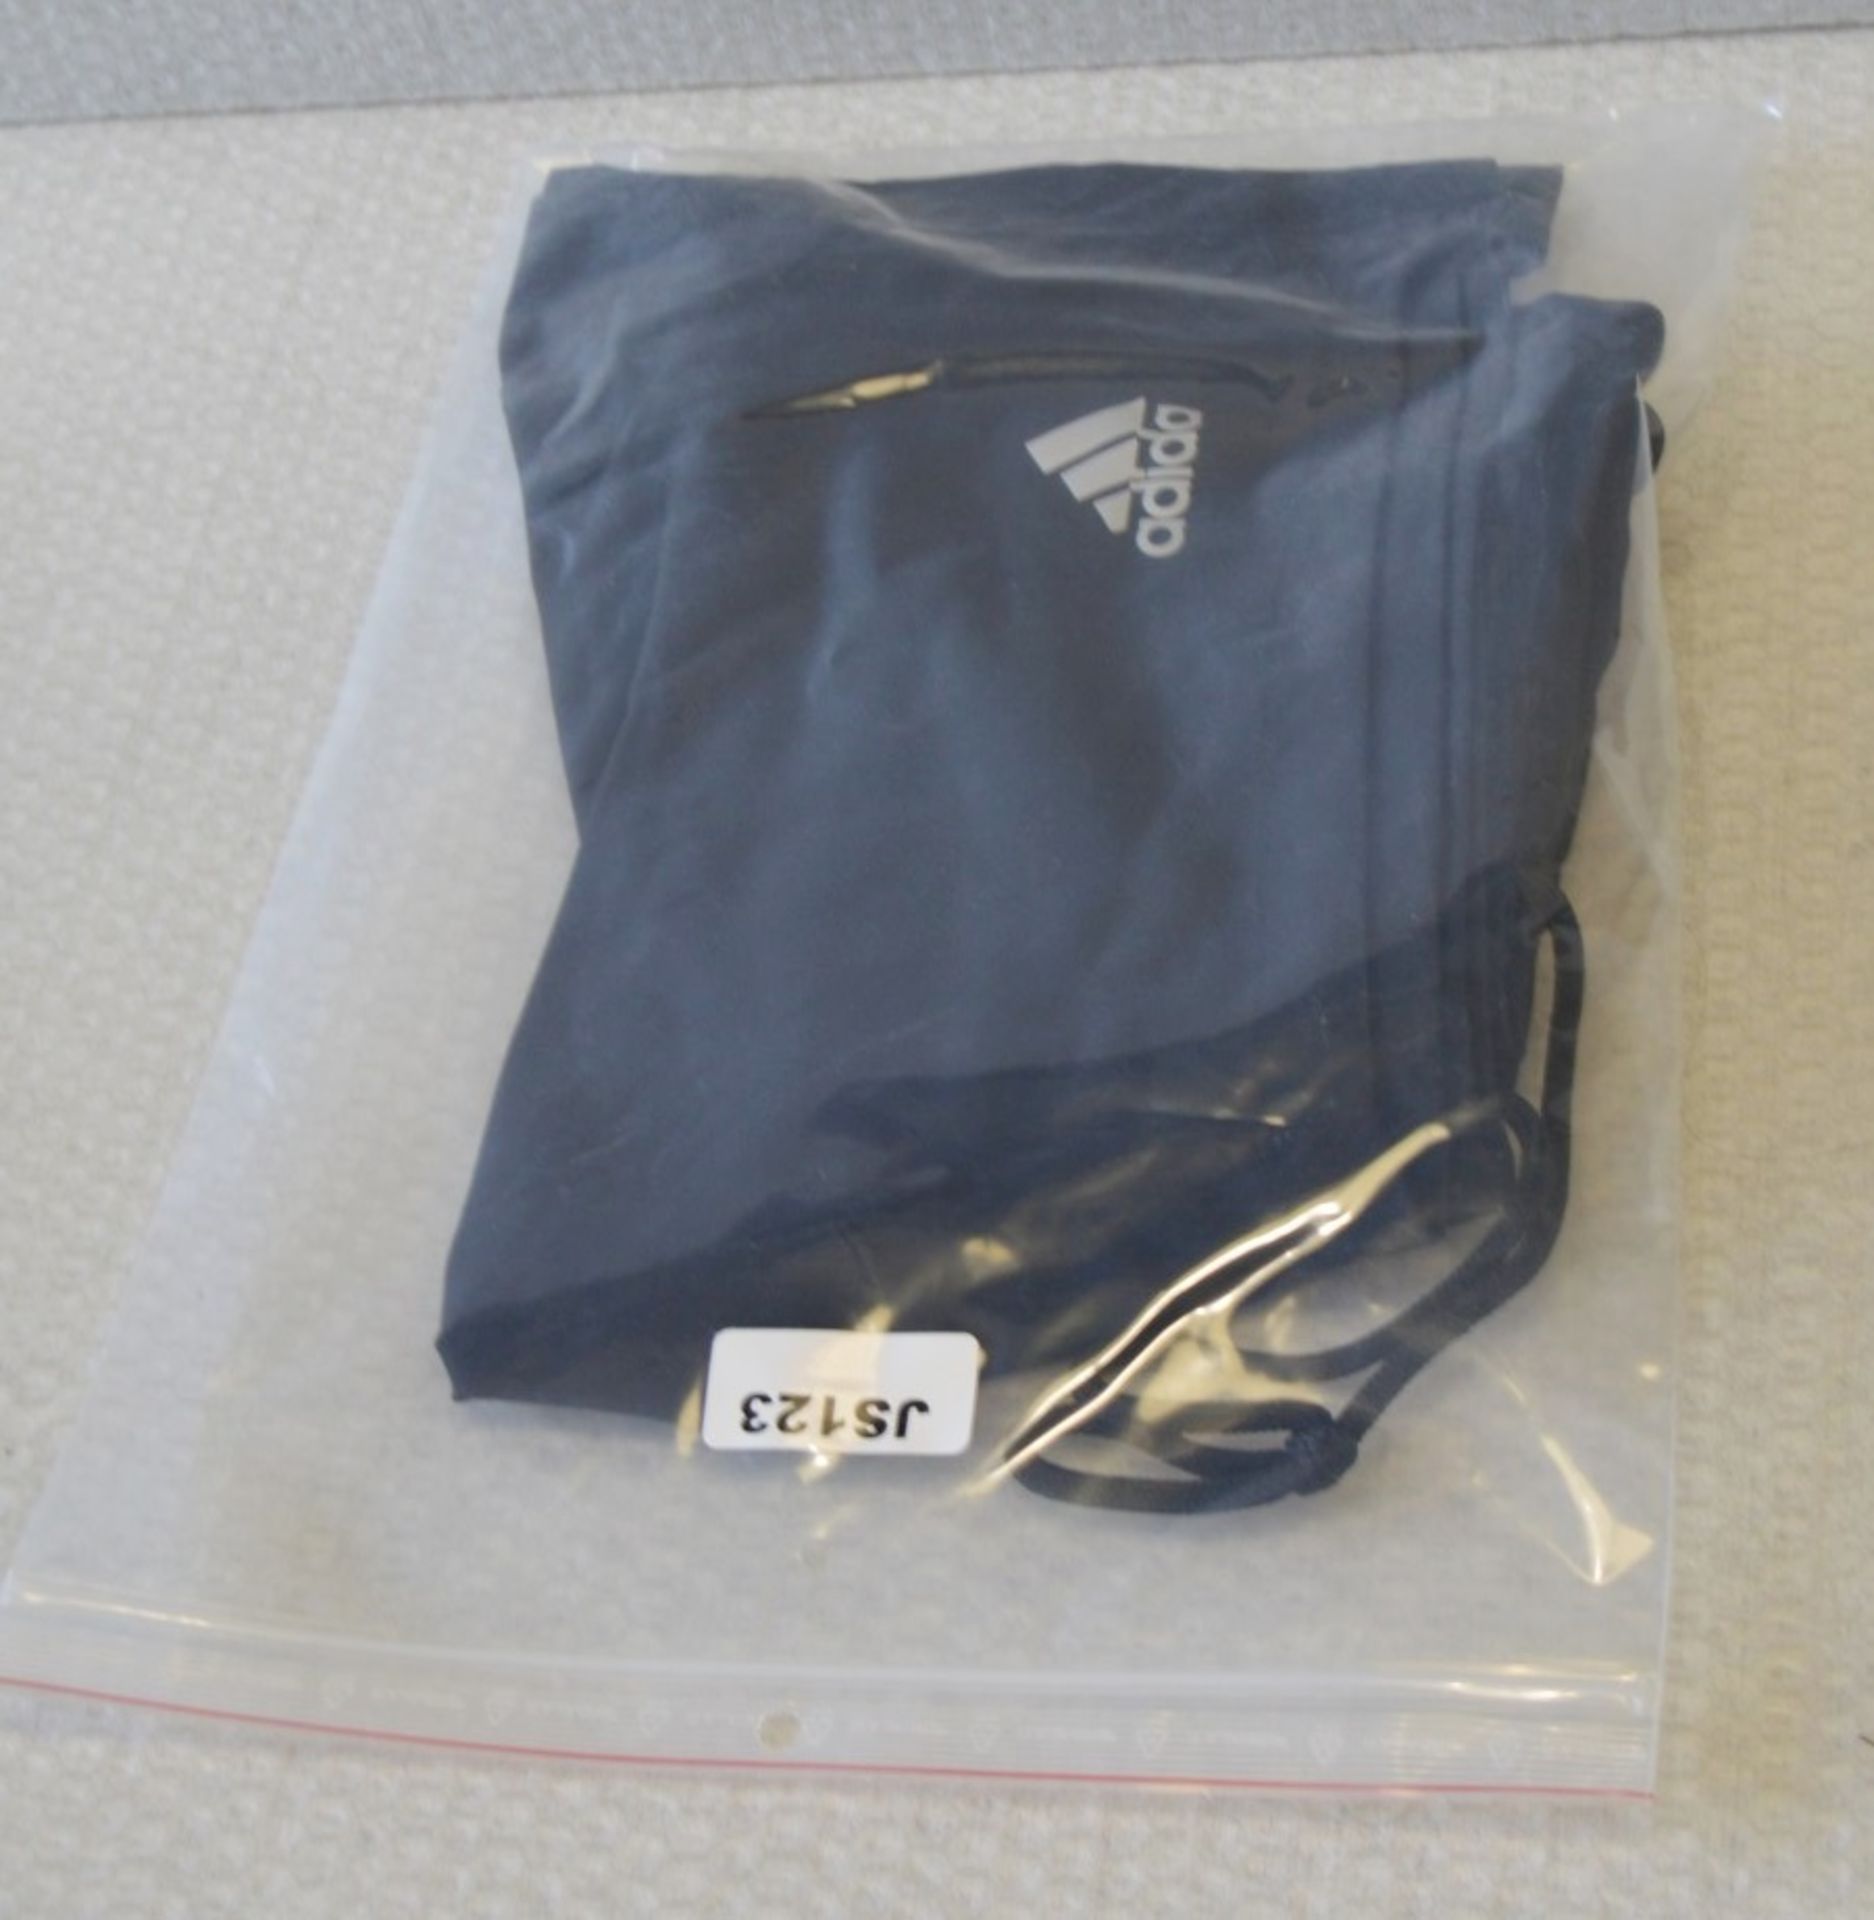 4 x Assorted Pairs Of Men's Genuine Adidas Shorts - AllIn Black - Sizes: L-XL - Preowned - Image 21 of 23